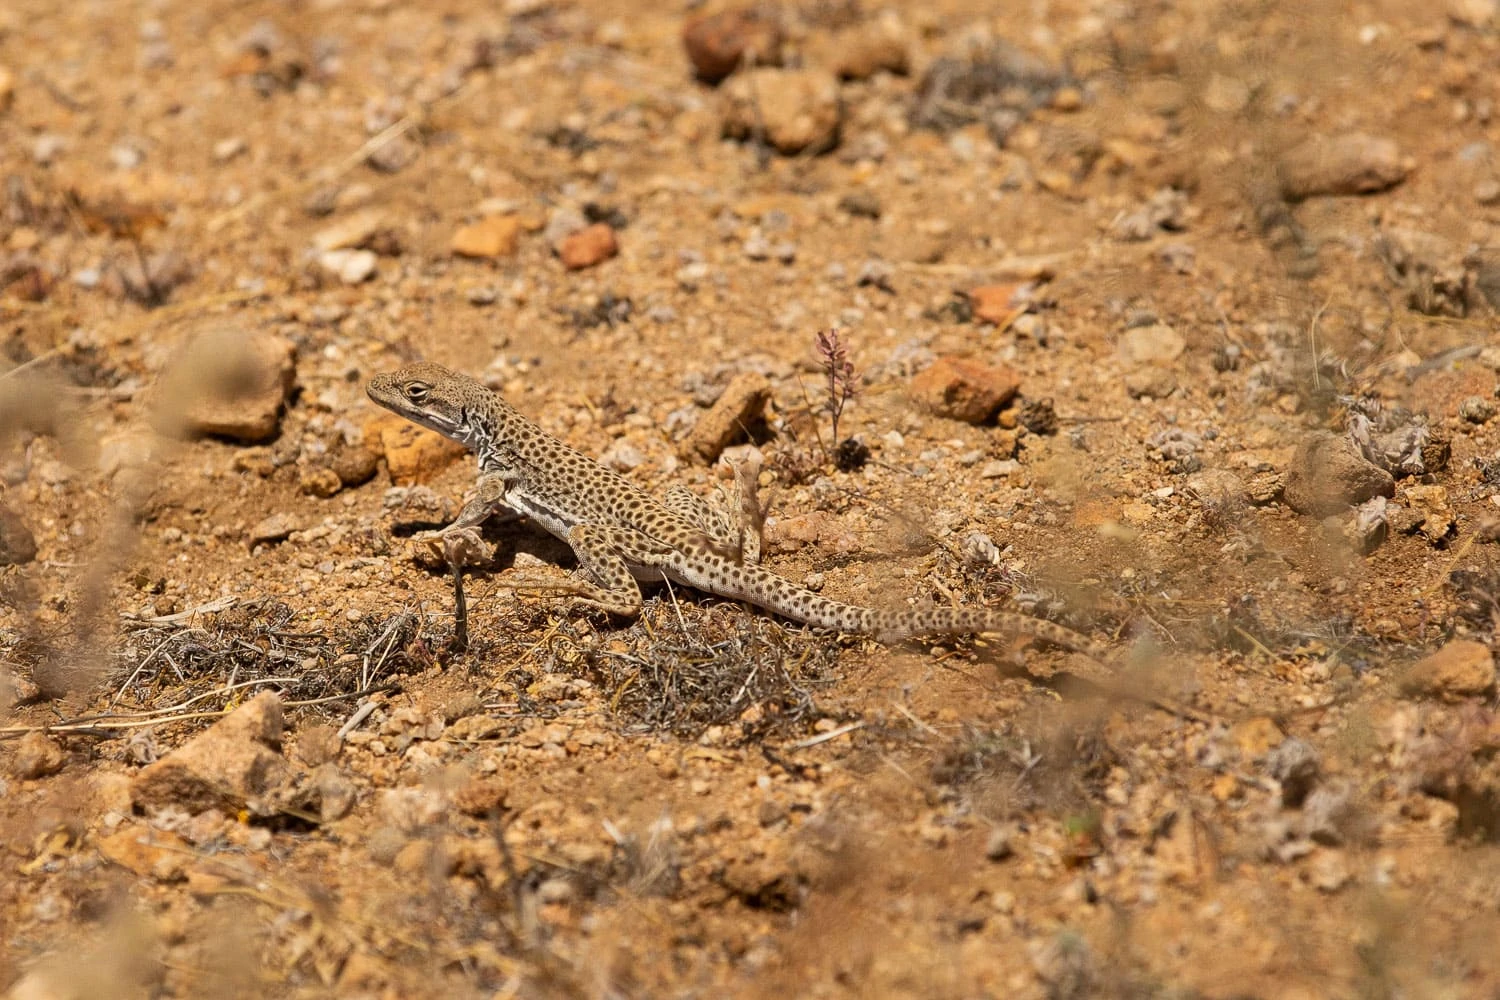 A leopard lizard blends into the stony ground.